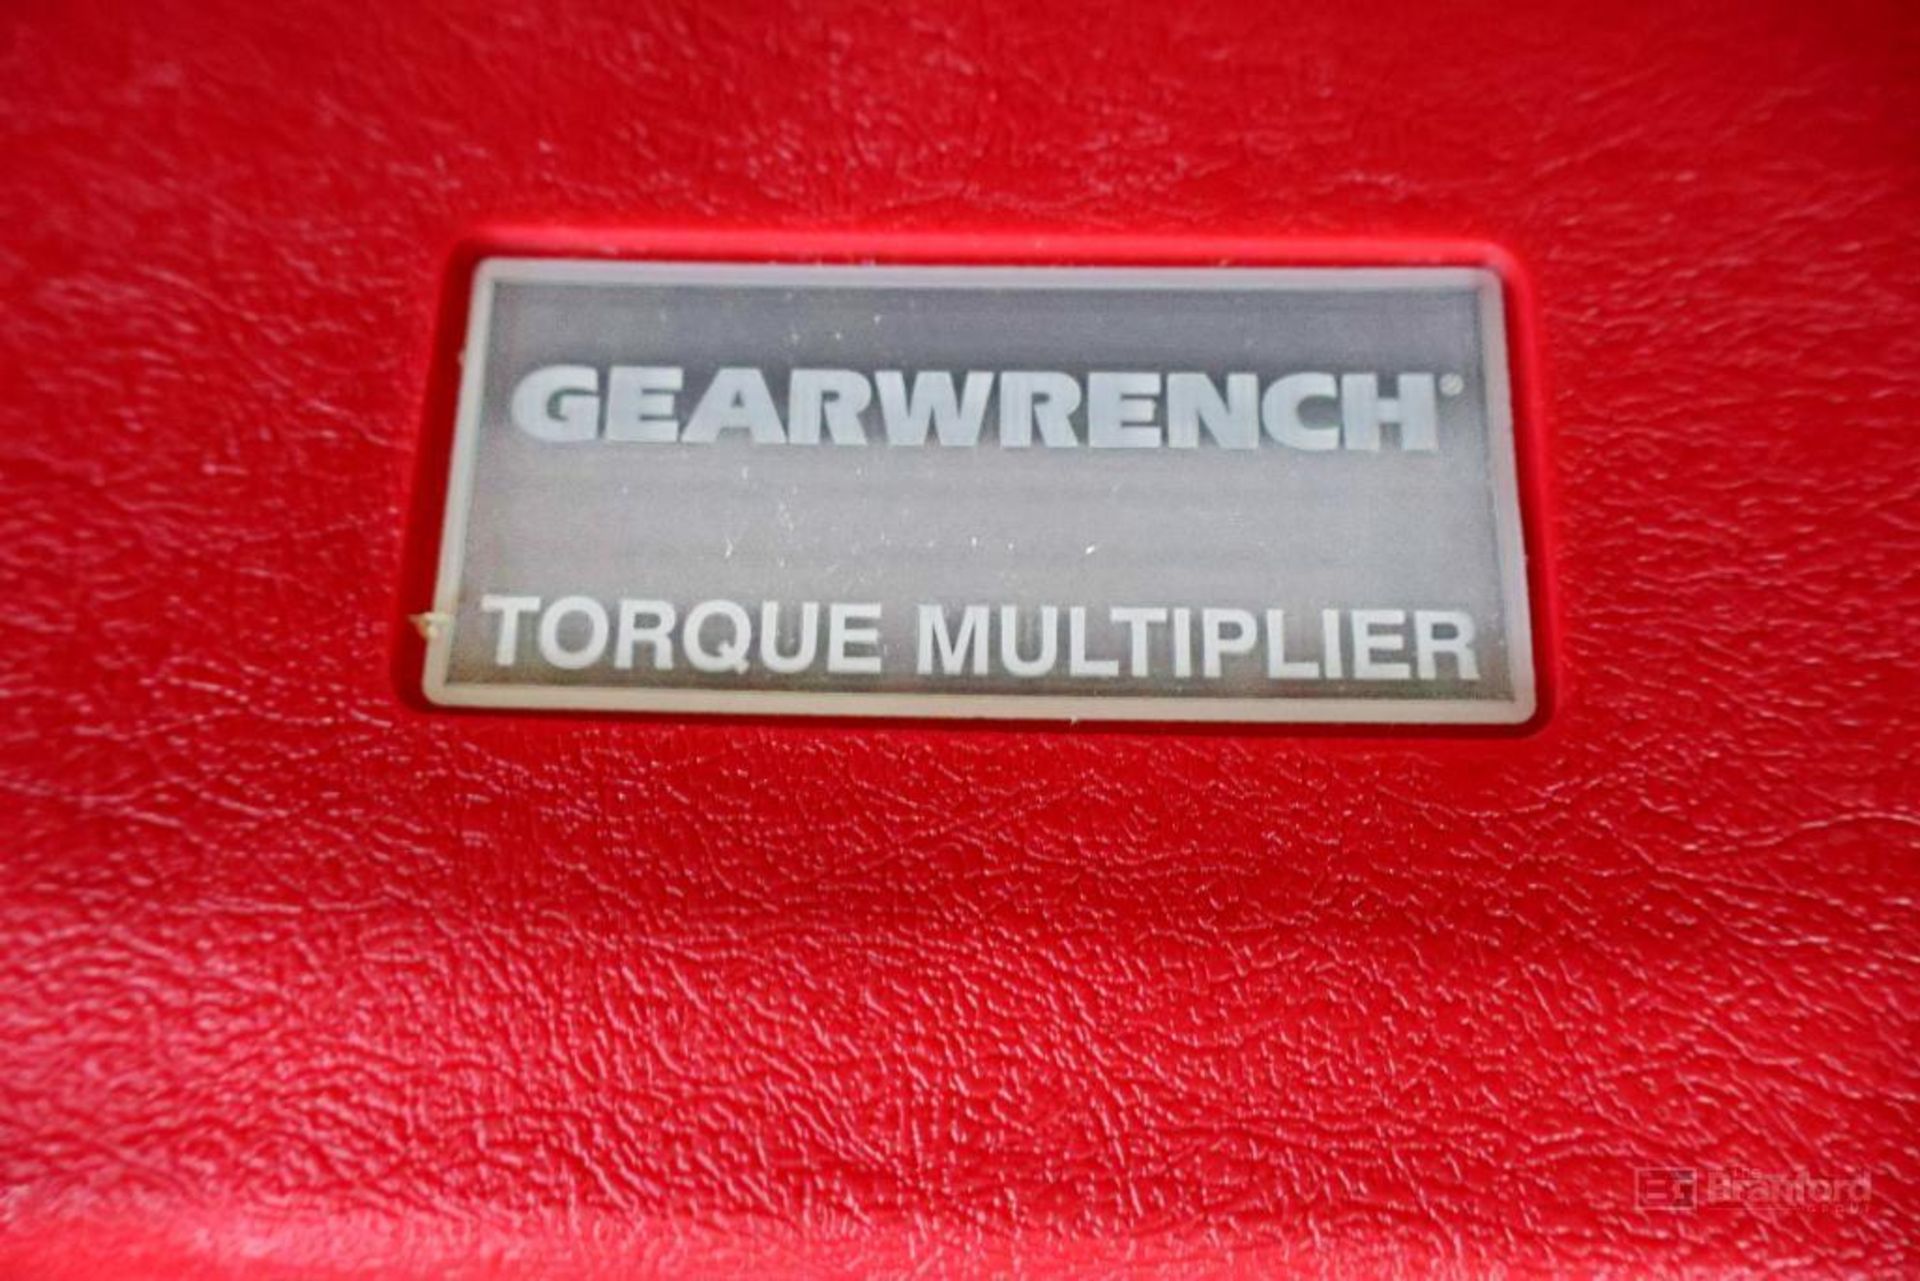 GearWrench 64-830G Torque Multiplier - Image 4 of 4